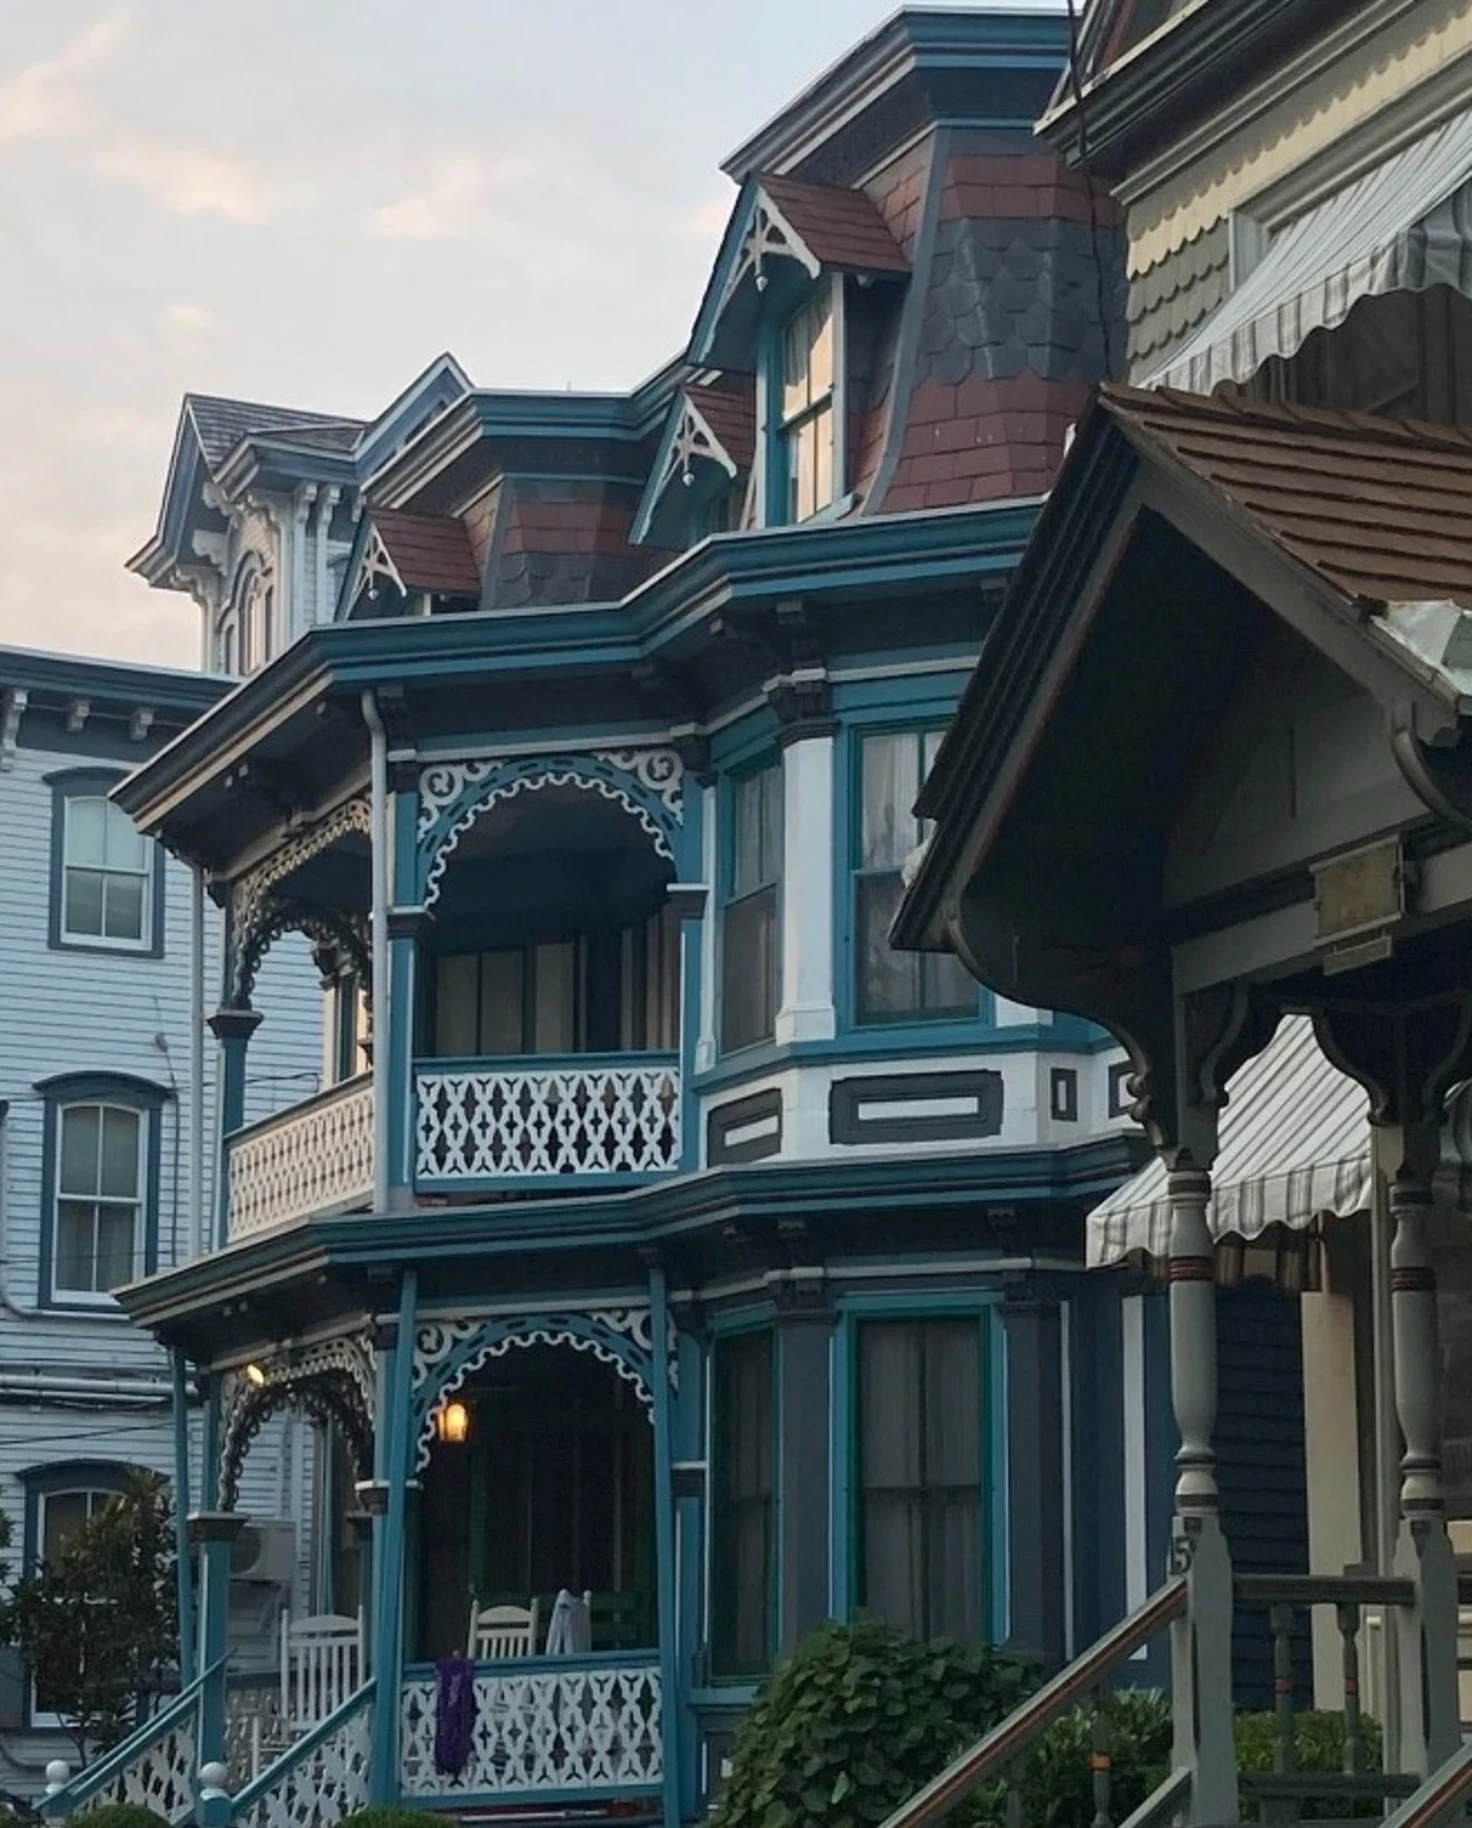 Jersey Shore's Painted Ladies' is the Victorian or Edwardian era architecture.